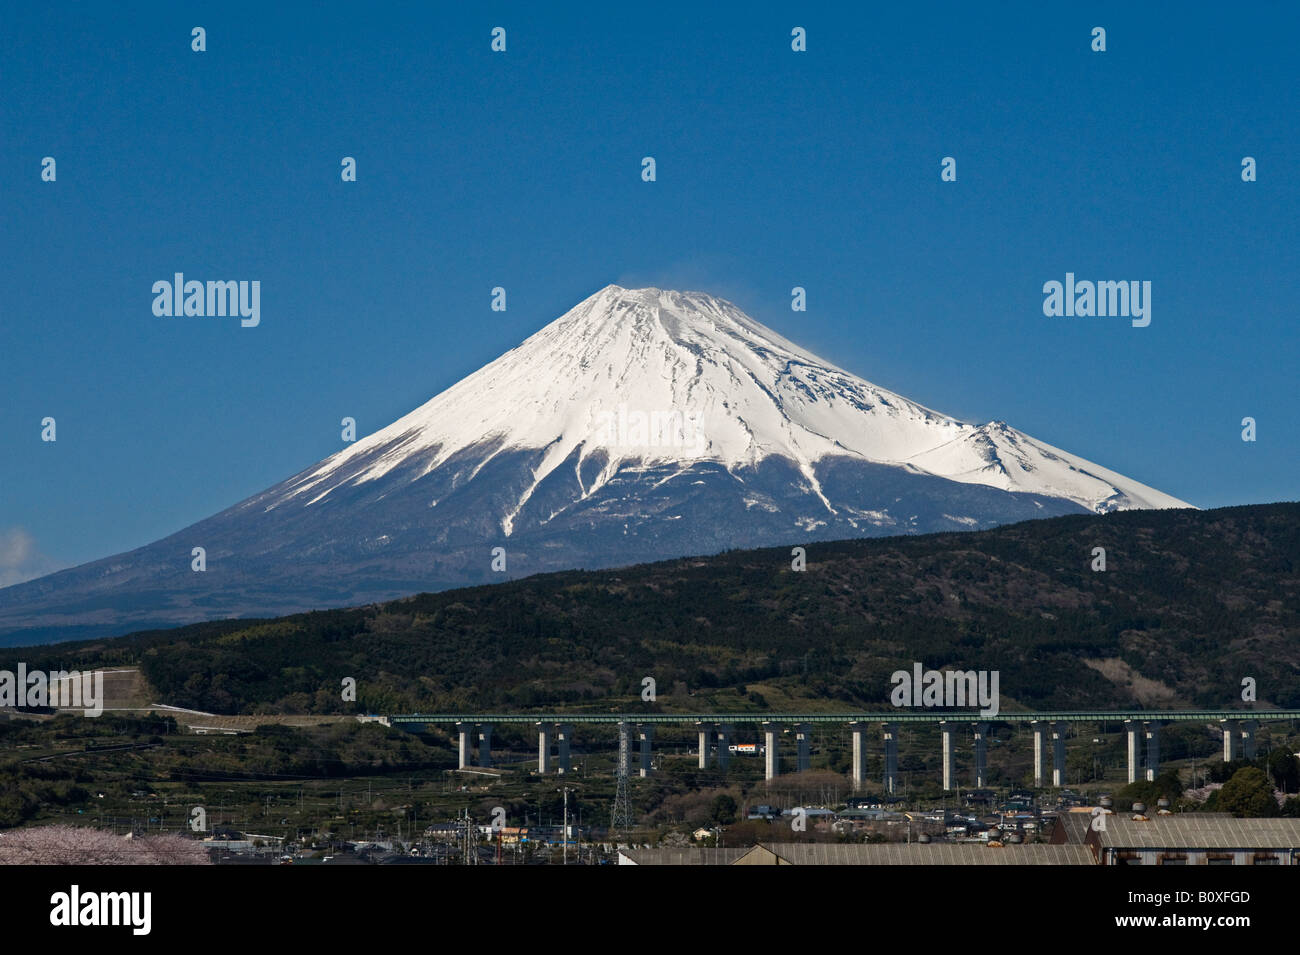 Japan. A view of Mount Fuji from the shinkansen (bullet train), with a motorway viaduct in the foreground Stock Photo